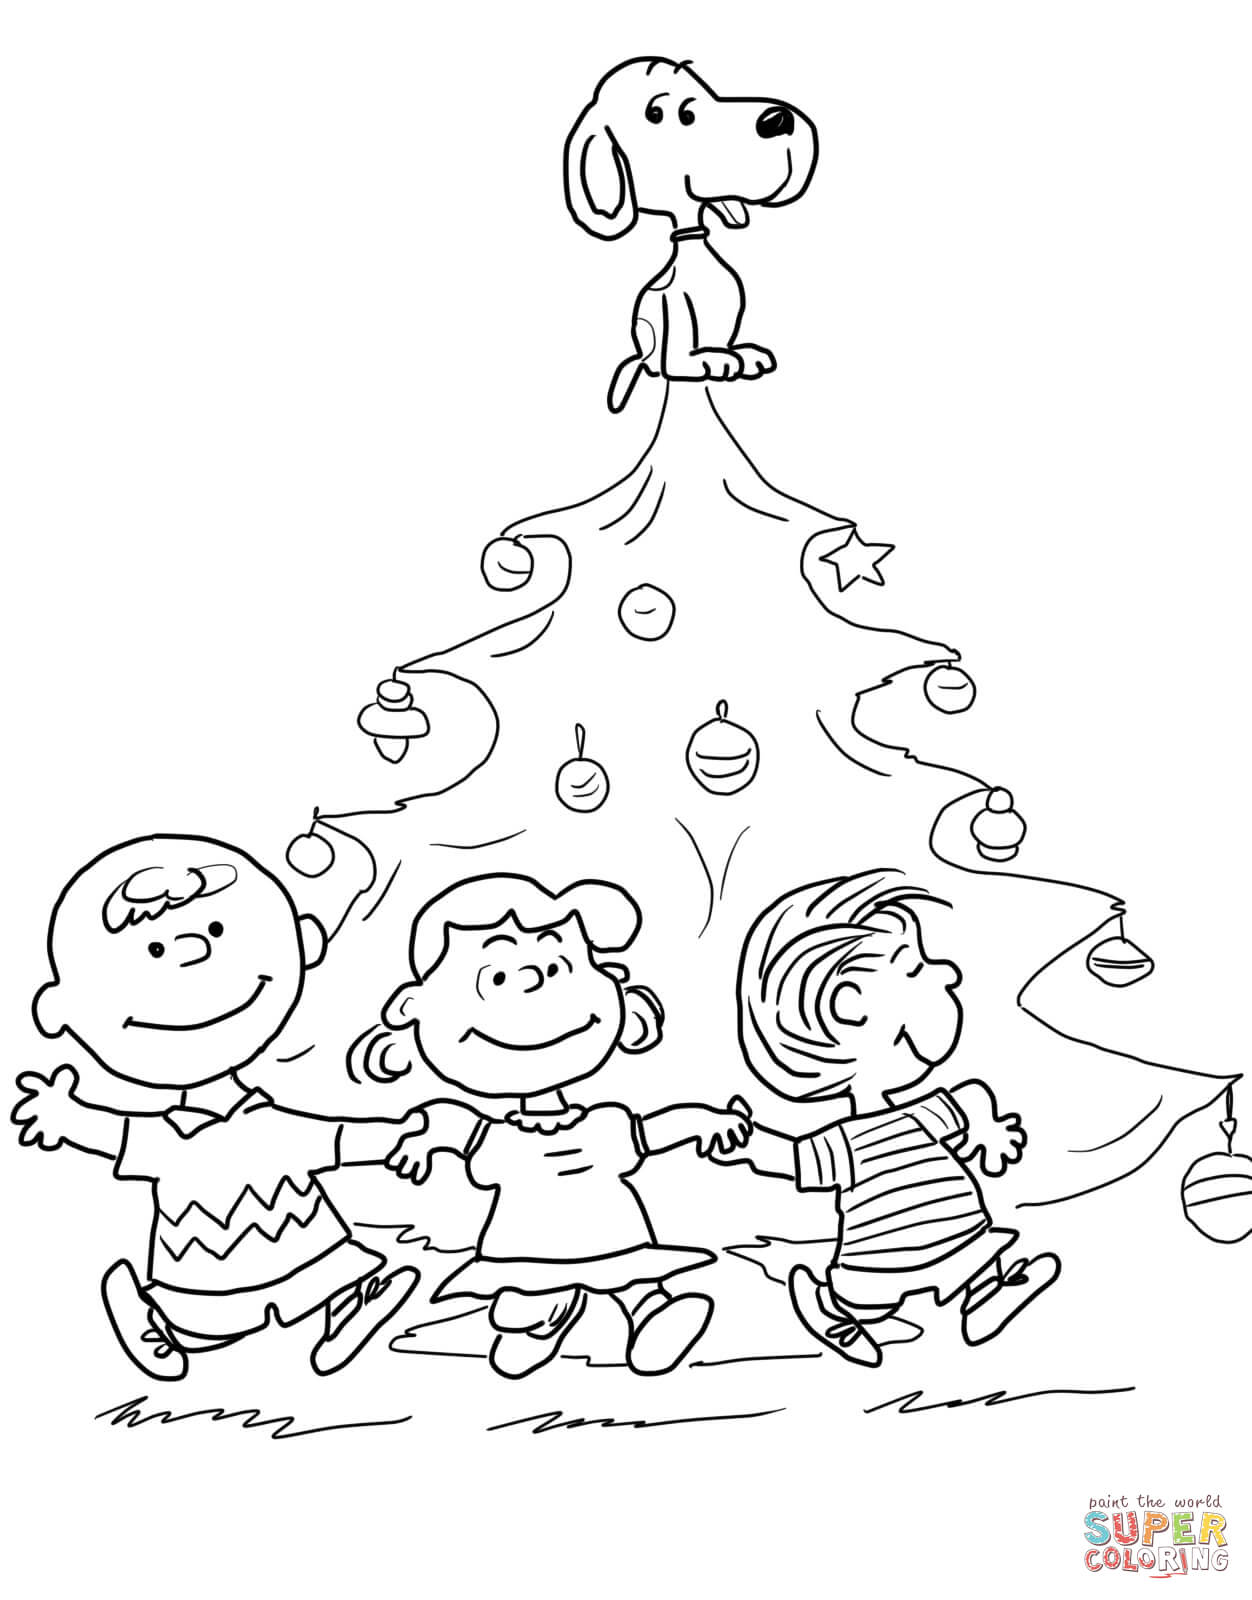 Charlie brown christmas tree coloring page free printable coloring pages